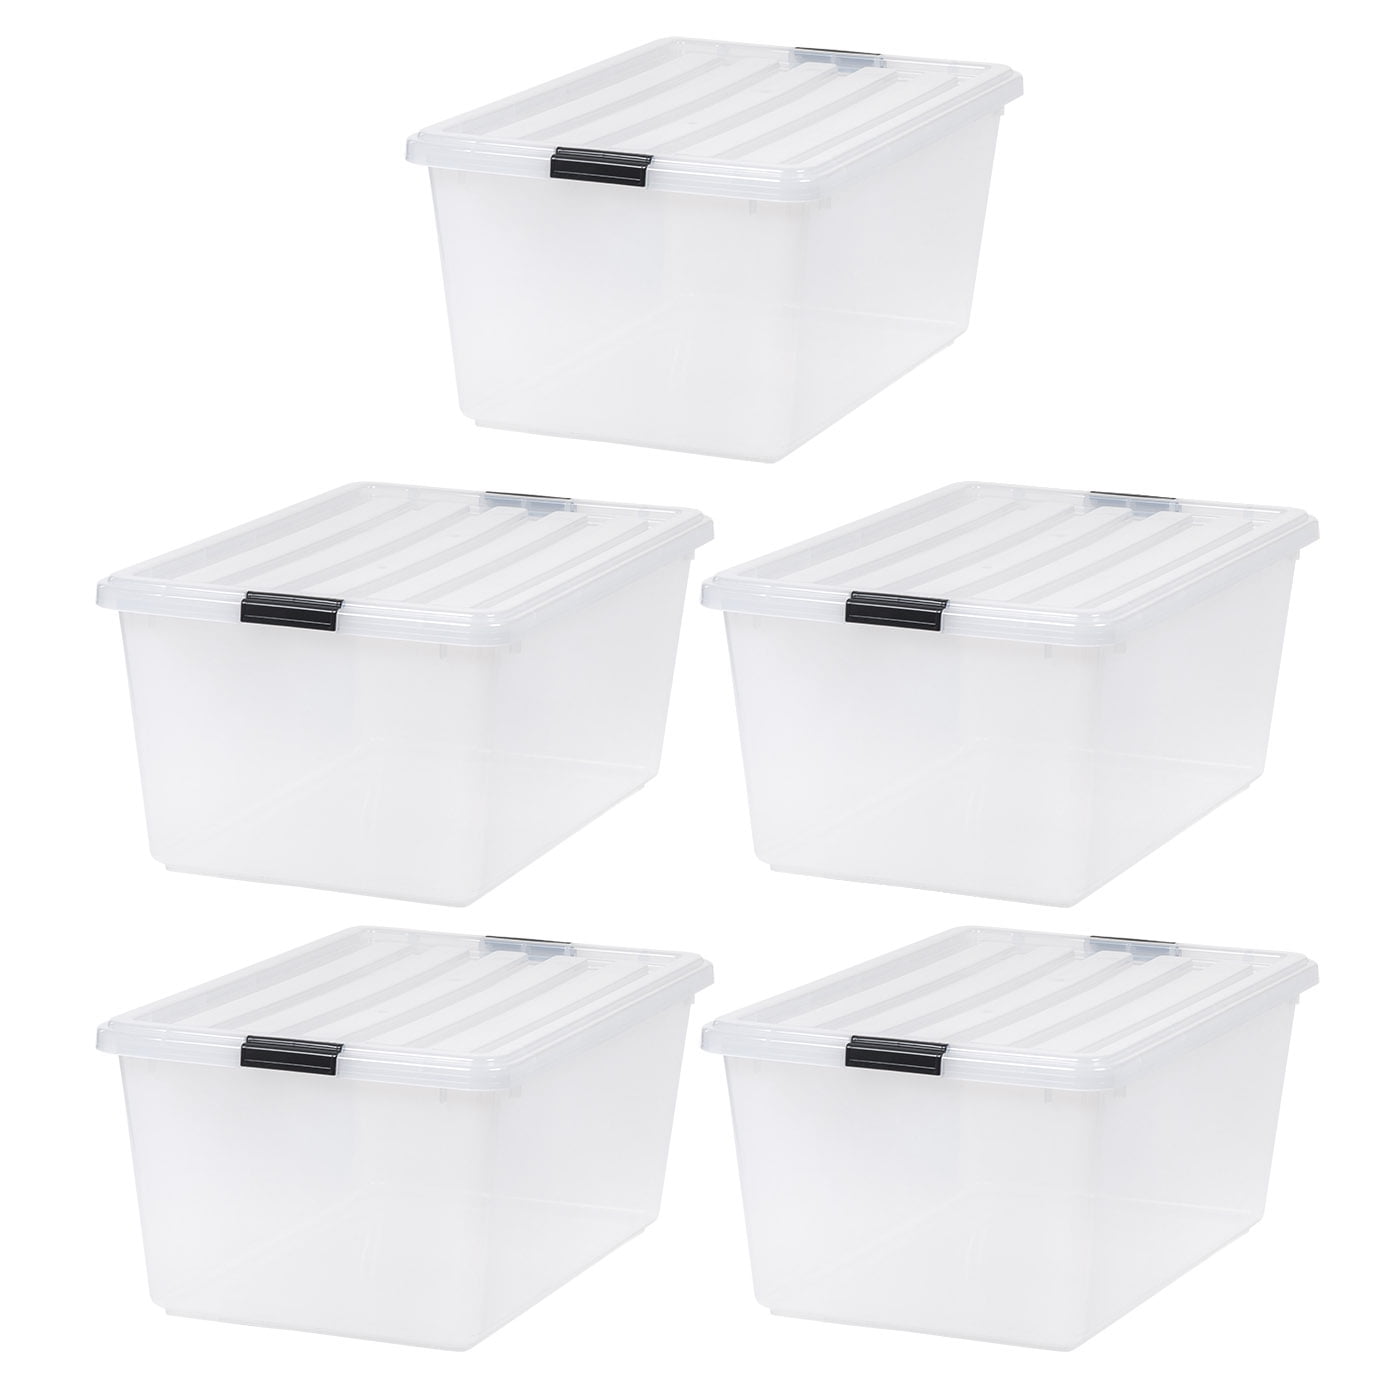 Berdeng Small Plastic Storage Bins with Lids, 3 Quart Small Storage Latch  Box, Stackable and Nestable,6 Pack, Clear with Black Buckle